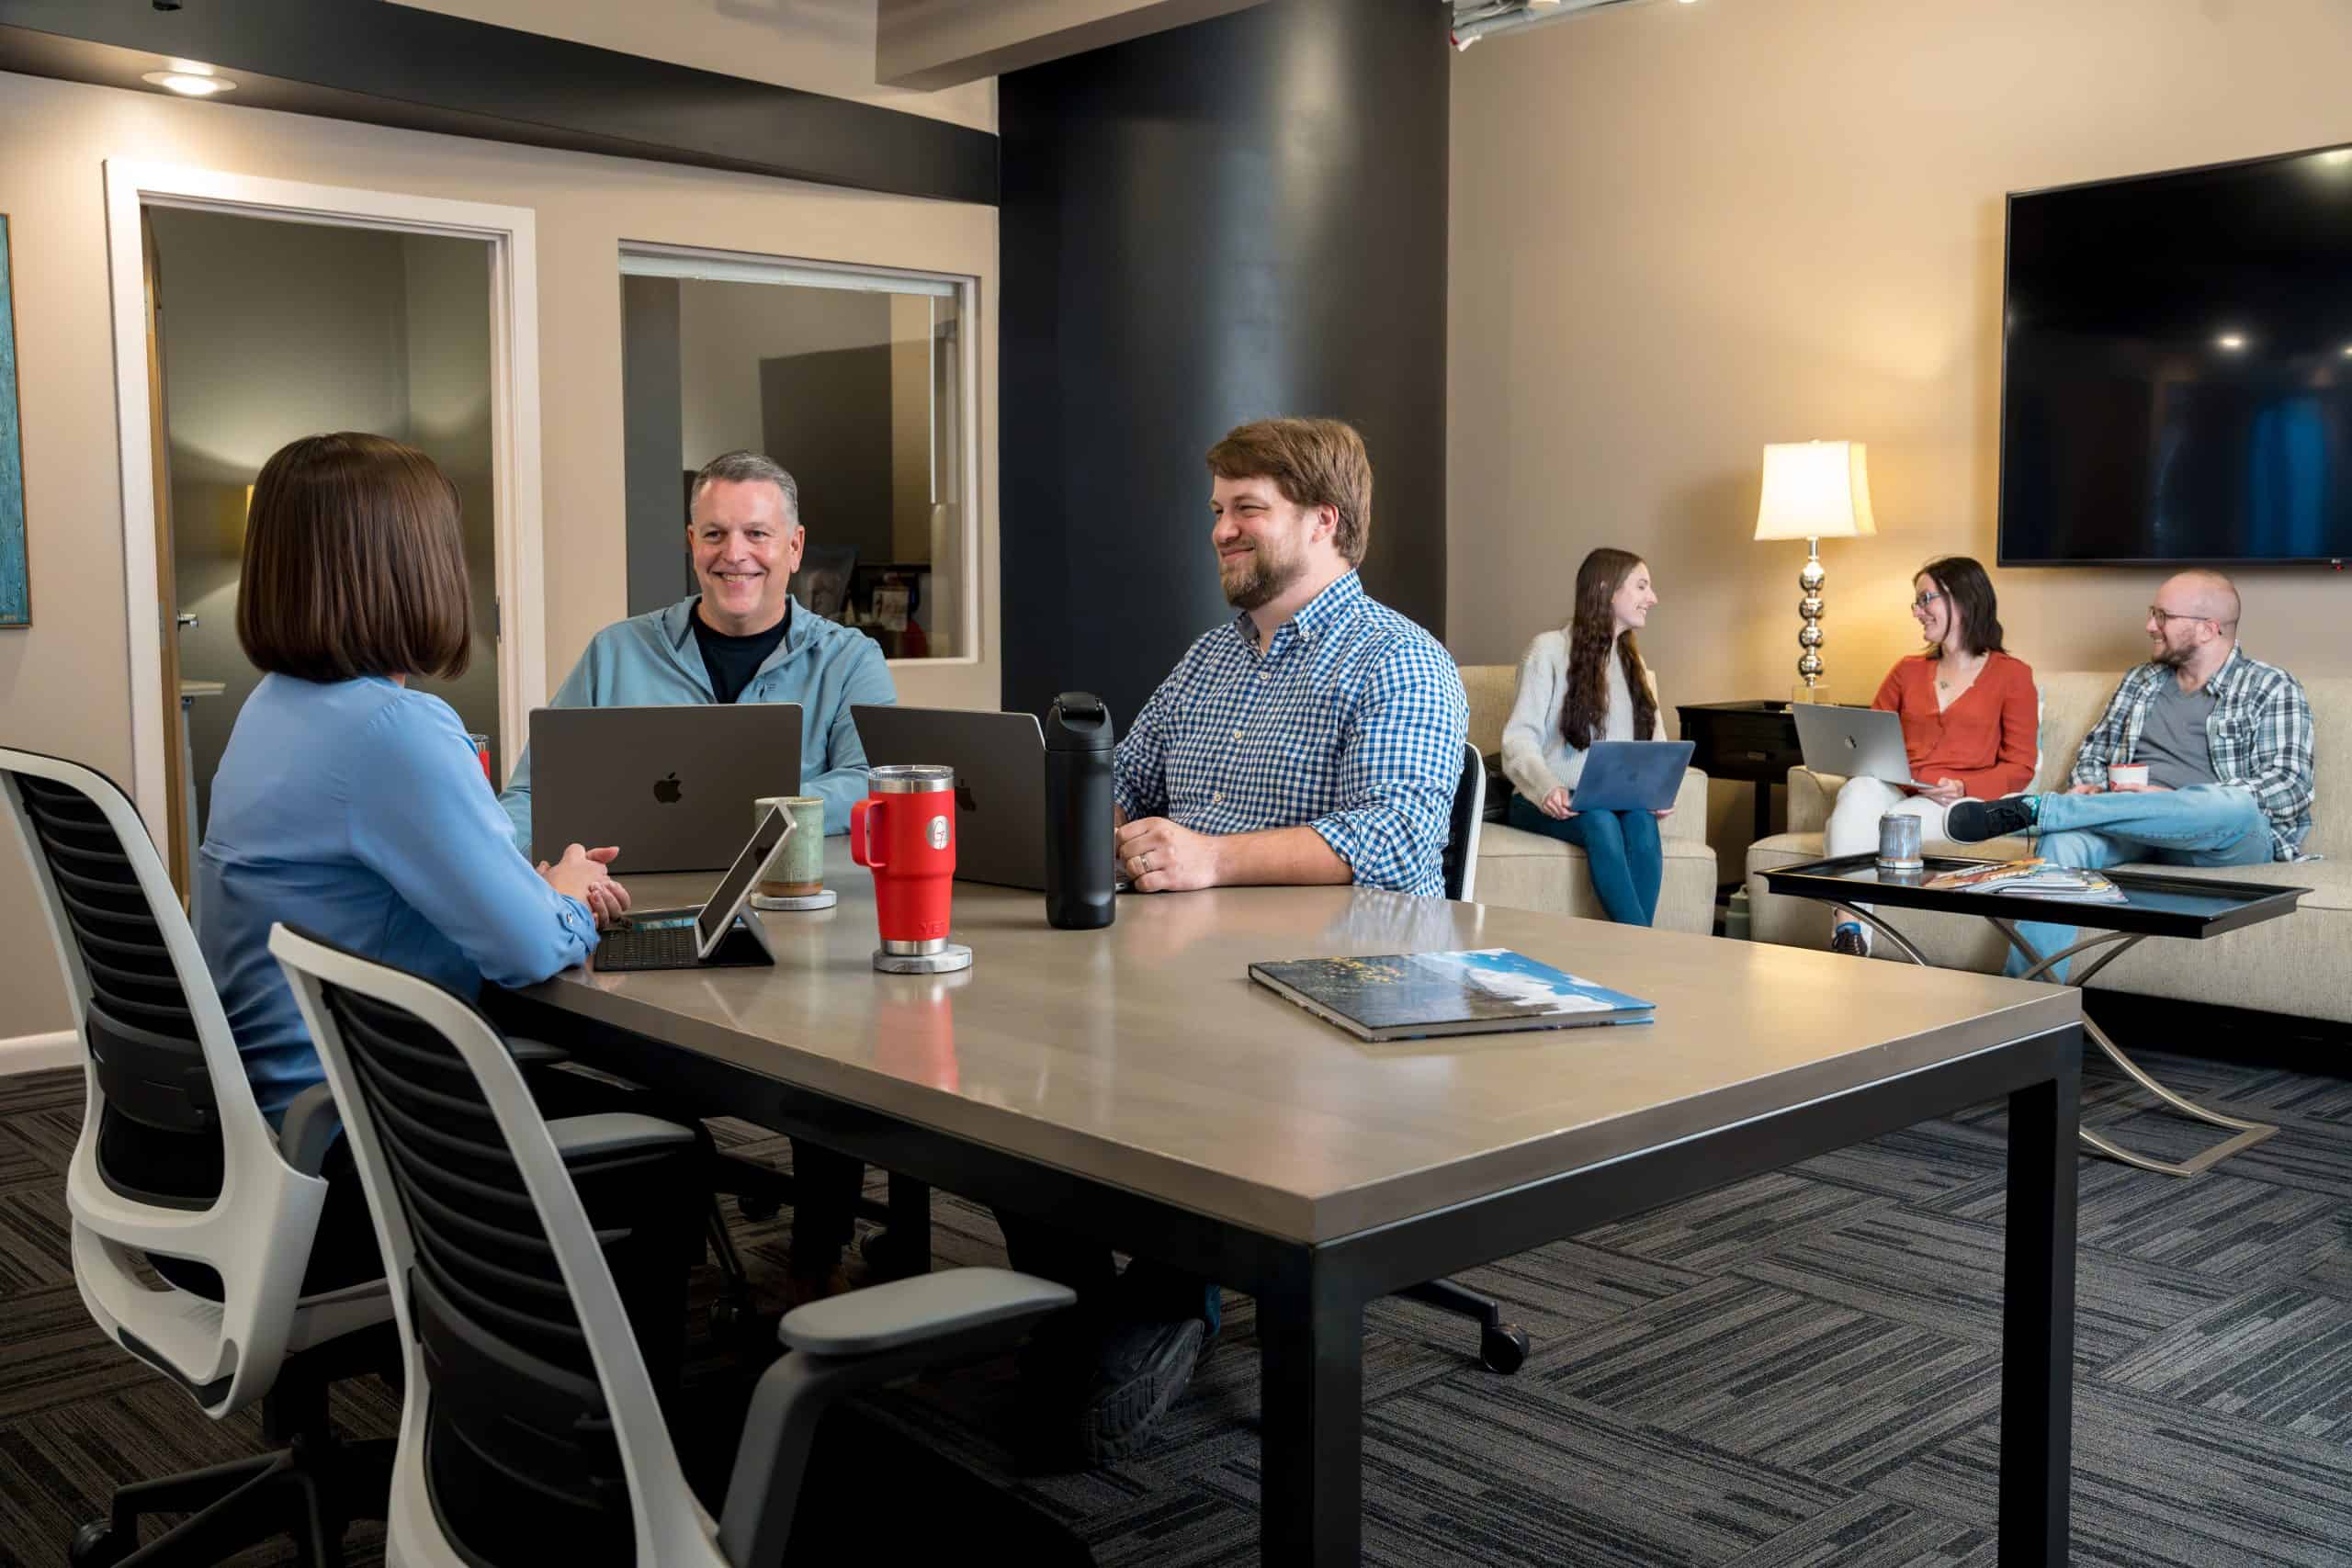 A group of employees collaborating at a conference table and another group in the background collaborating on a couch and chair